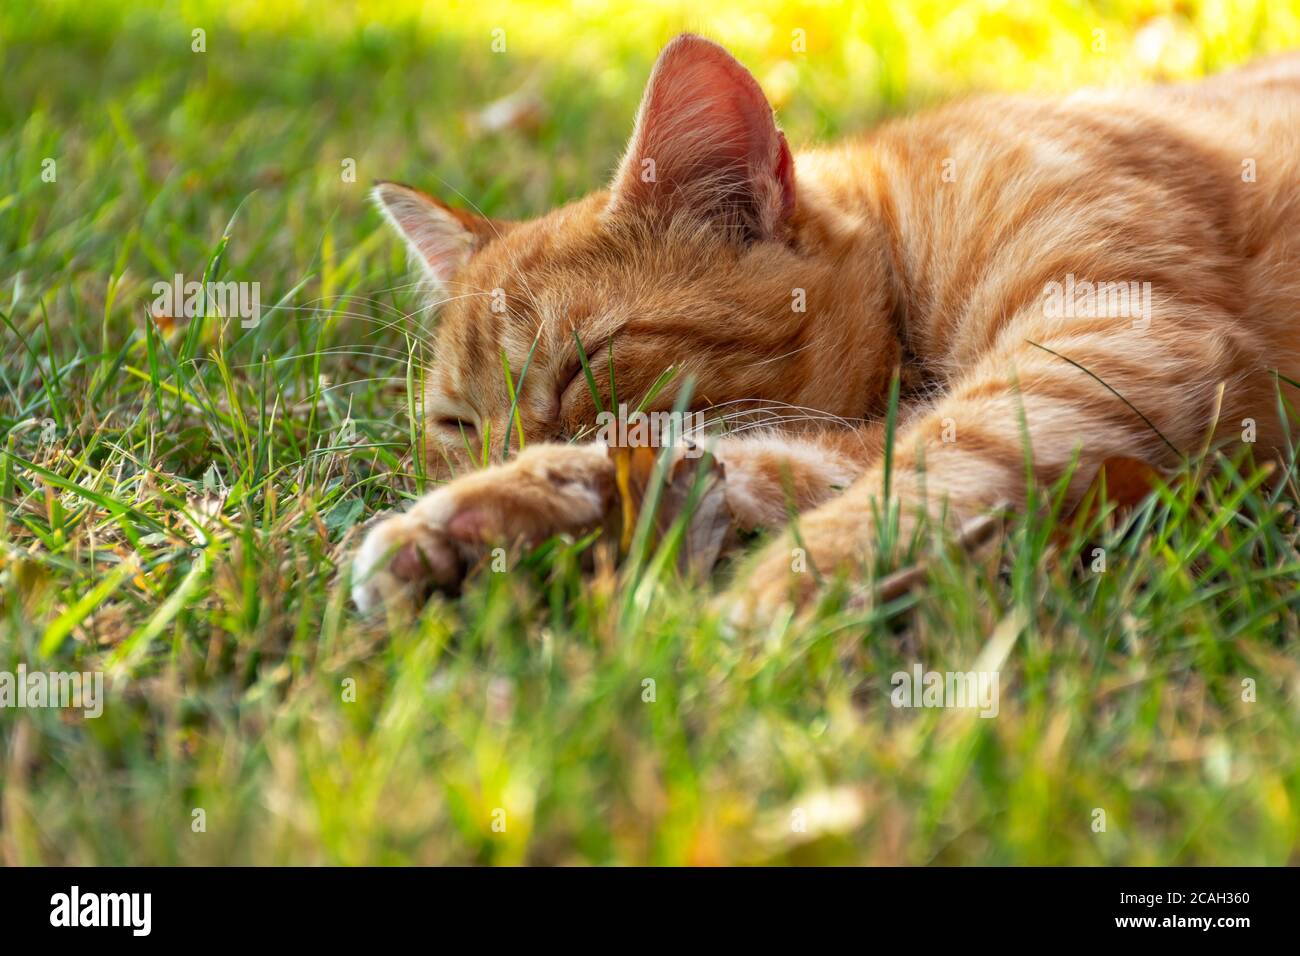 Small cute kitten cat sleeping outside in the park with flower grass background Stock Photo